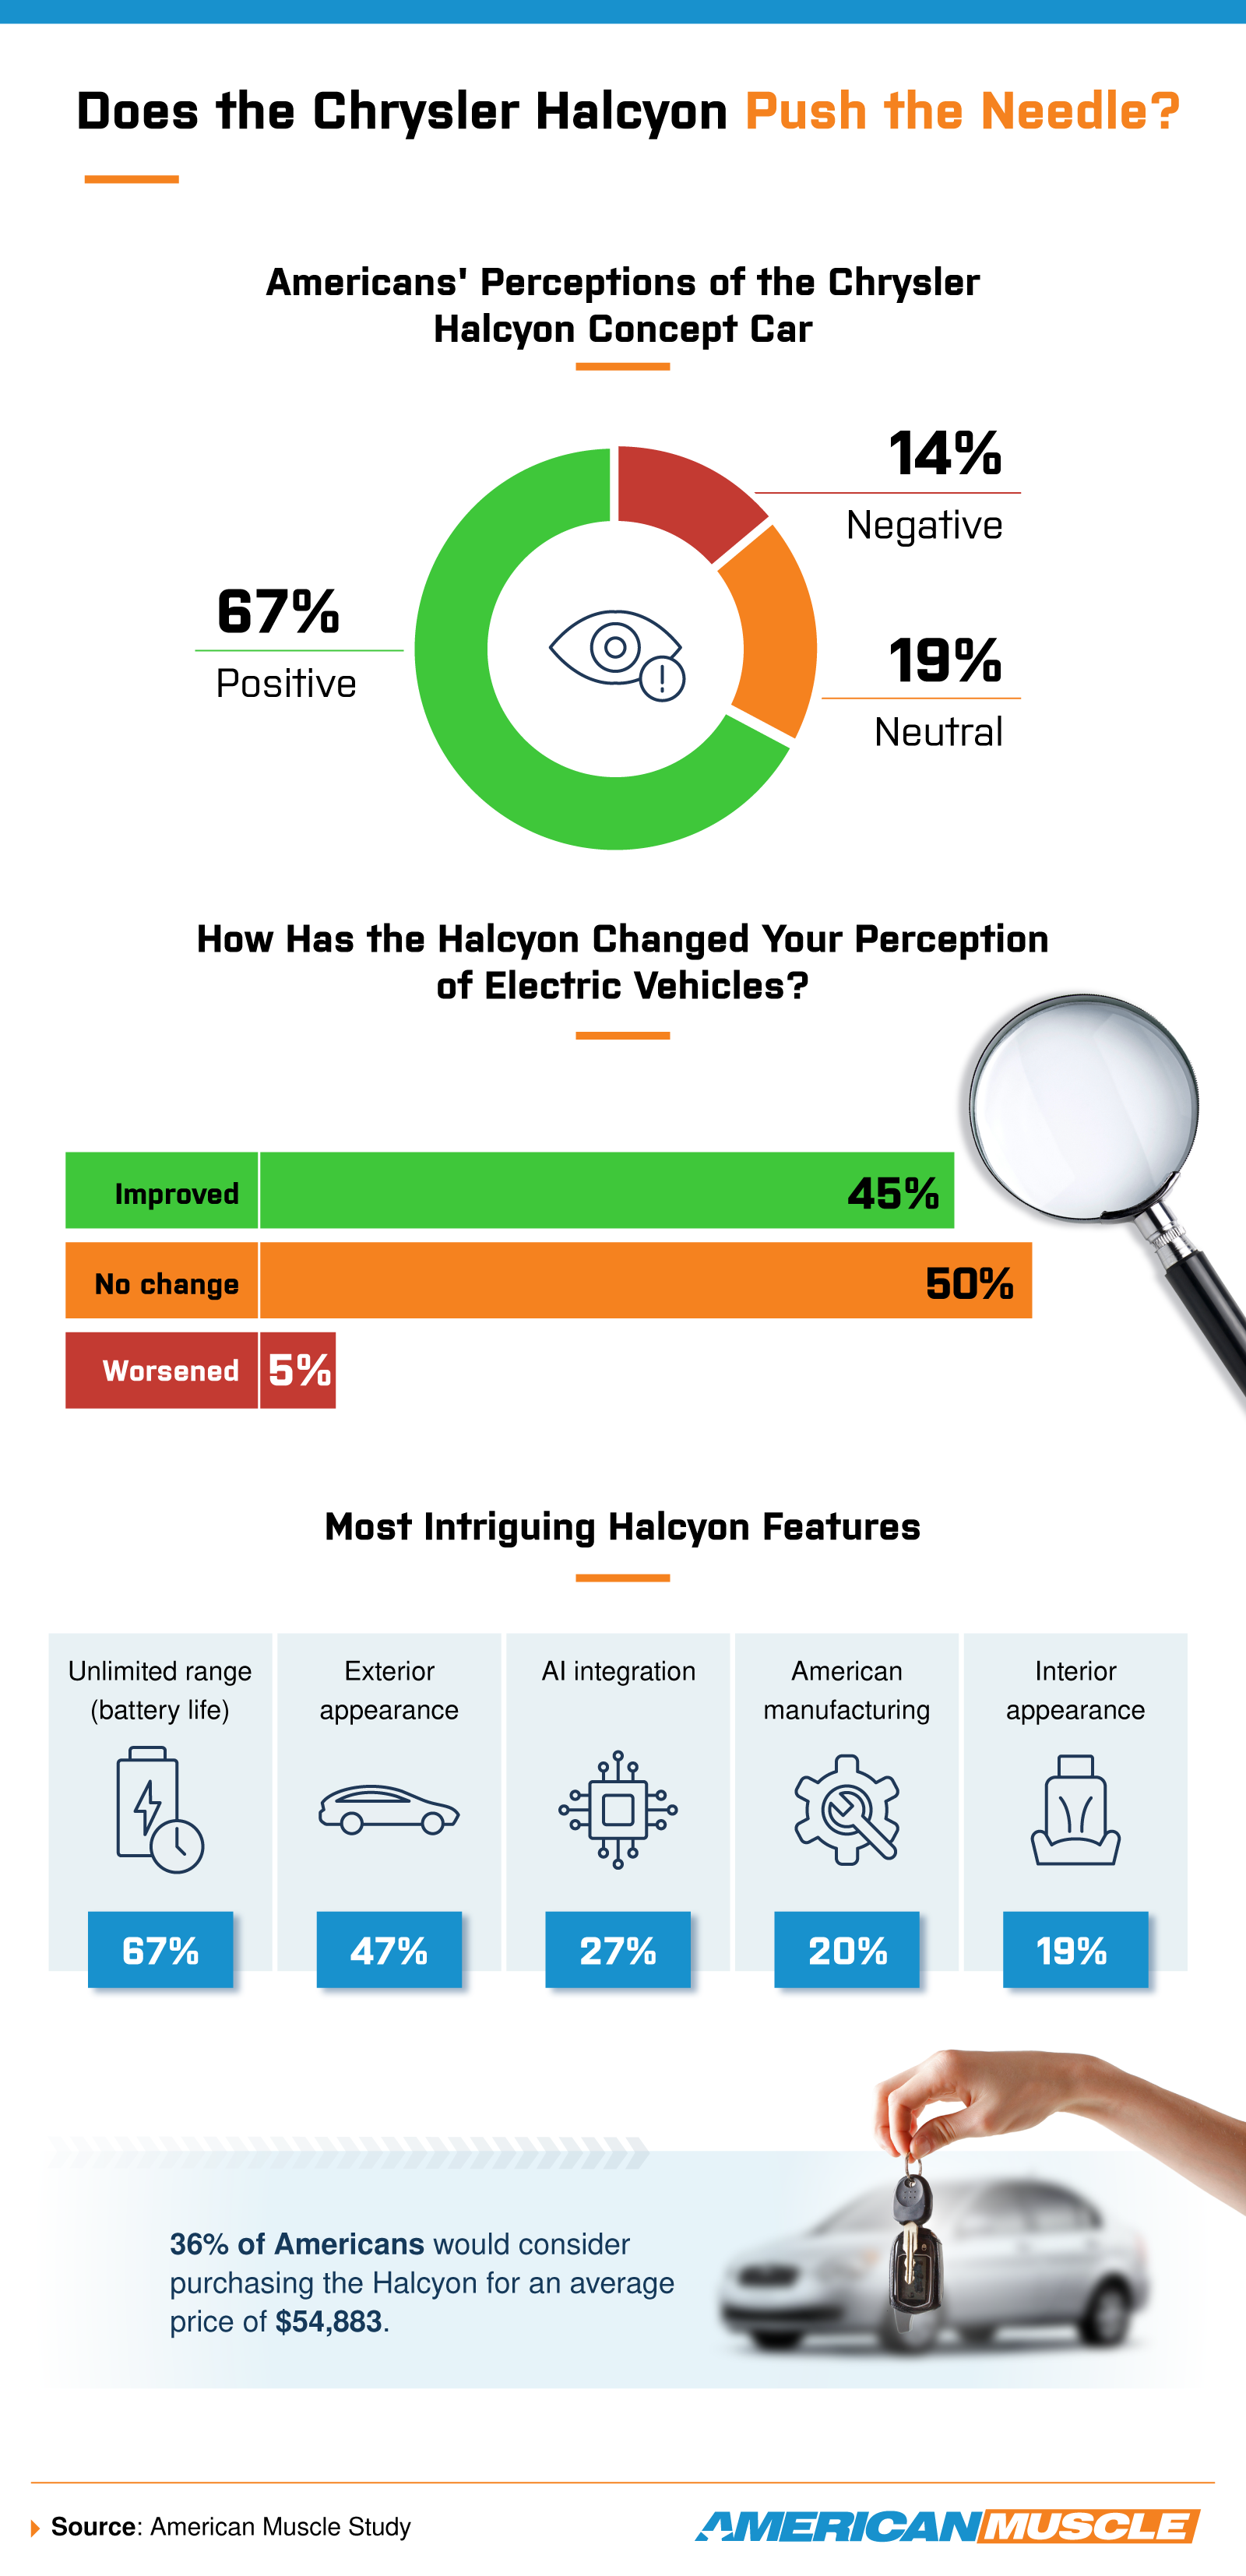 An infographic showing American perceptions toward the Chrysler Halcyon